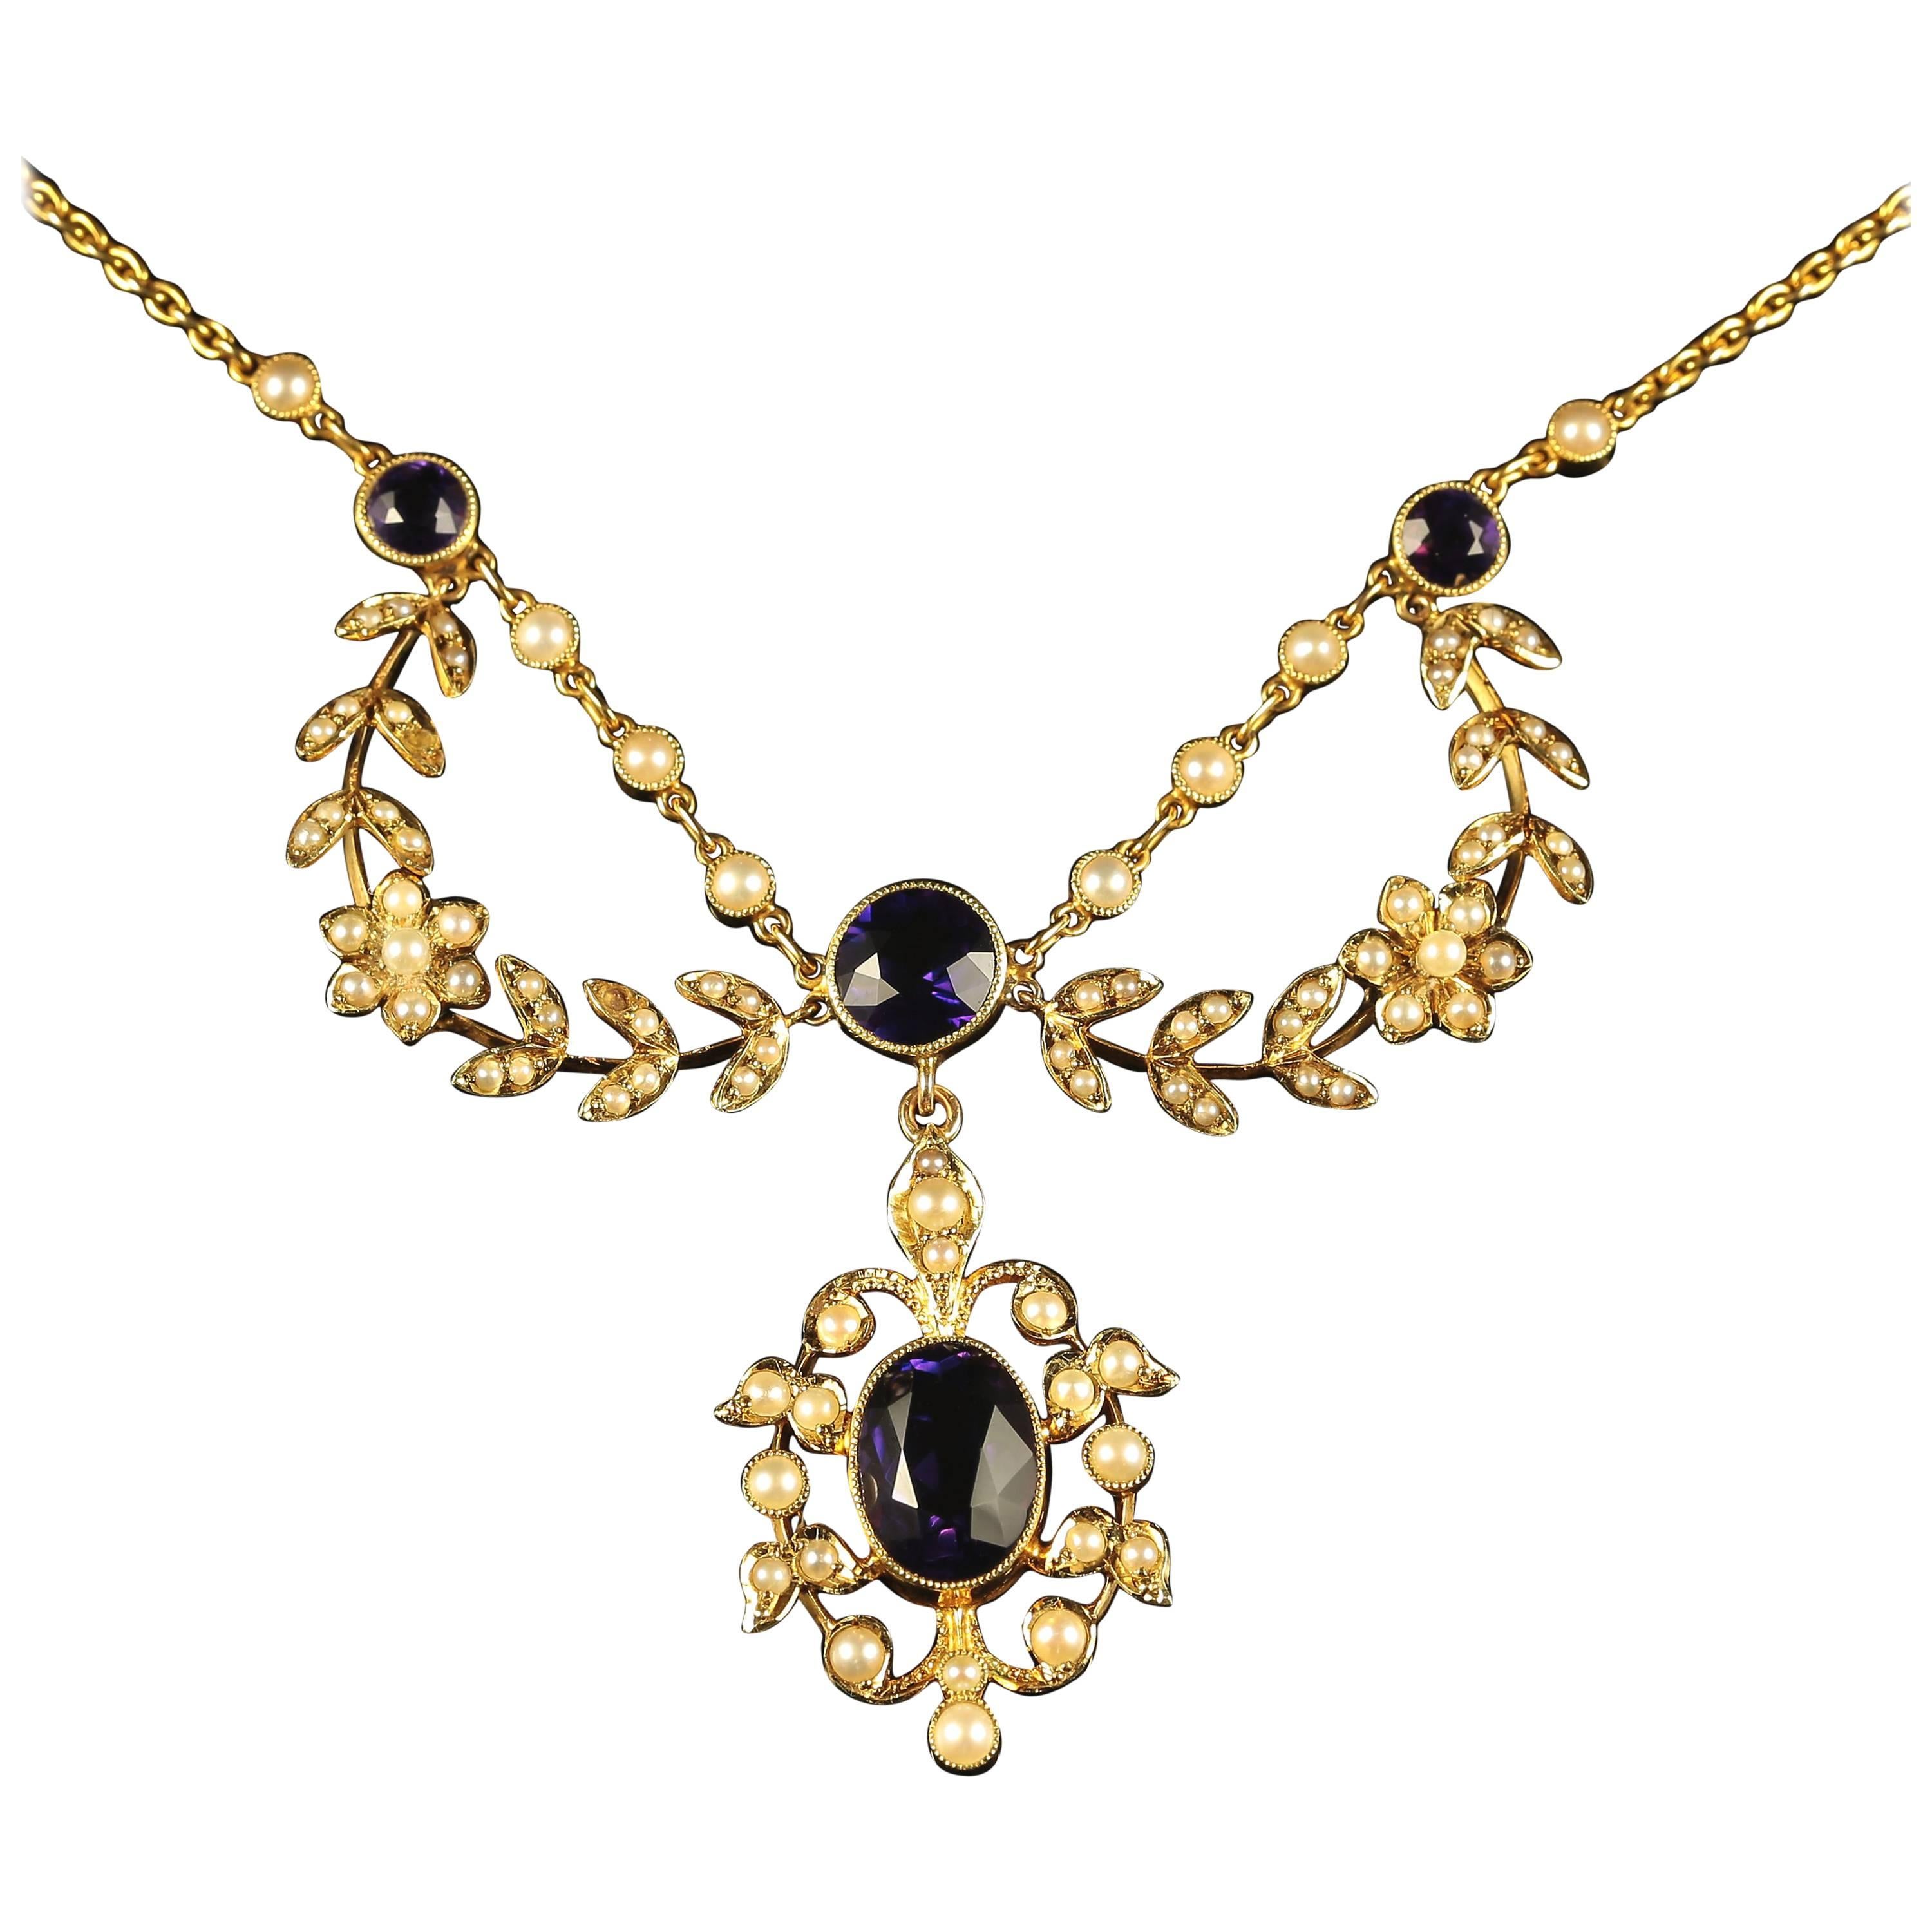 Antique Victorian Amethyst Pearl Necklace 15 Carat Gold Garland Necklace For Sale